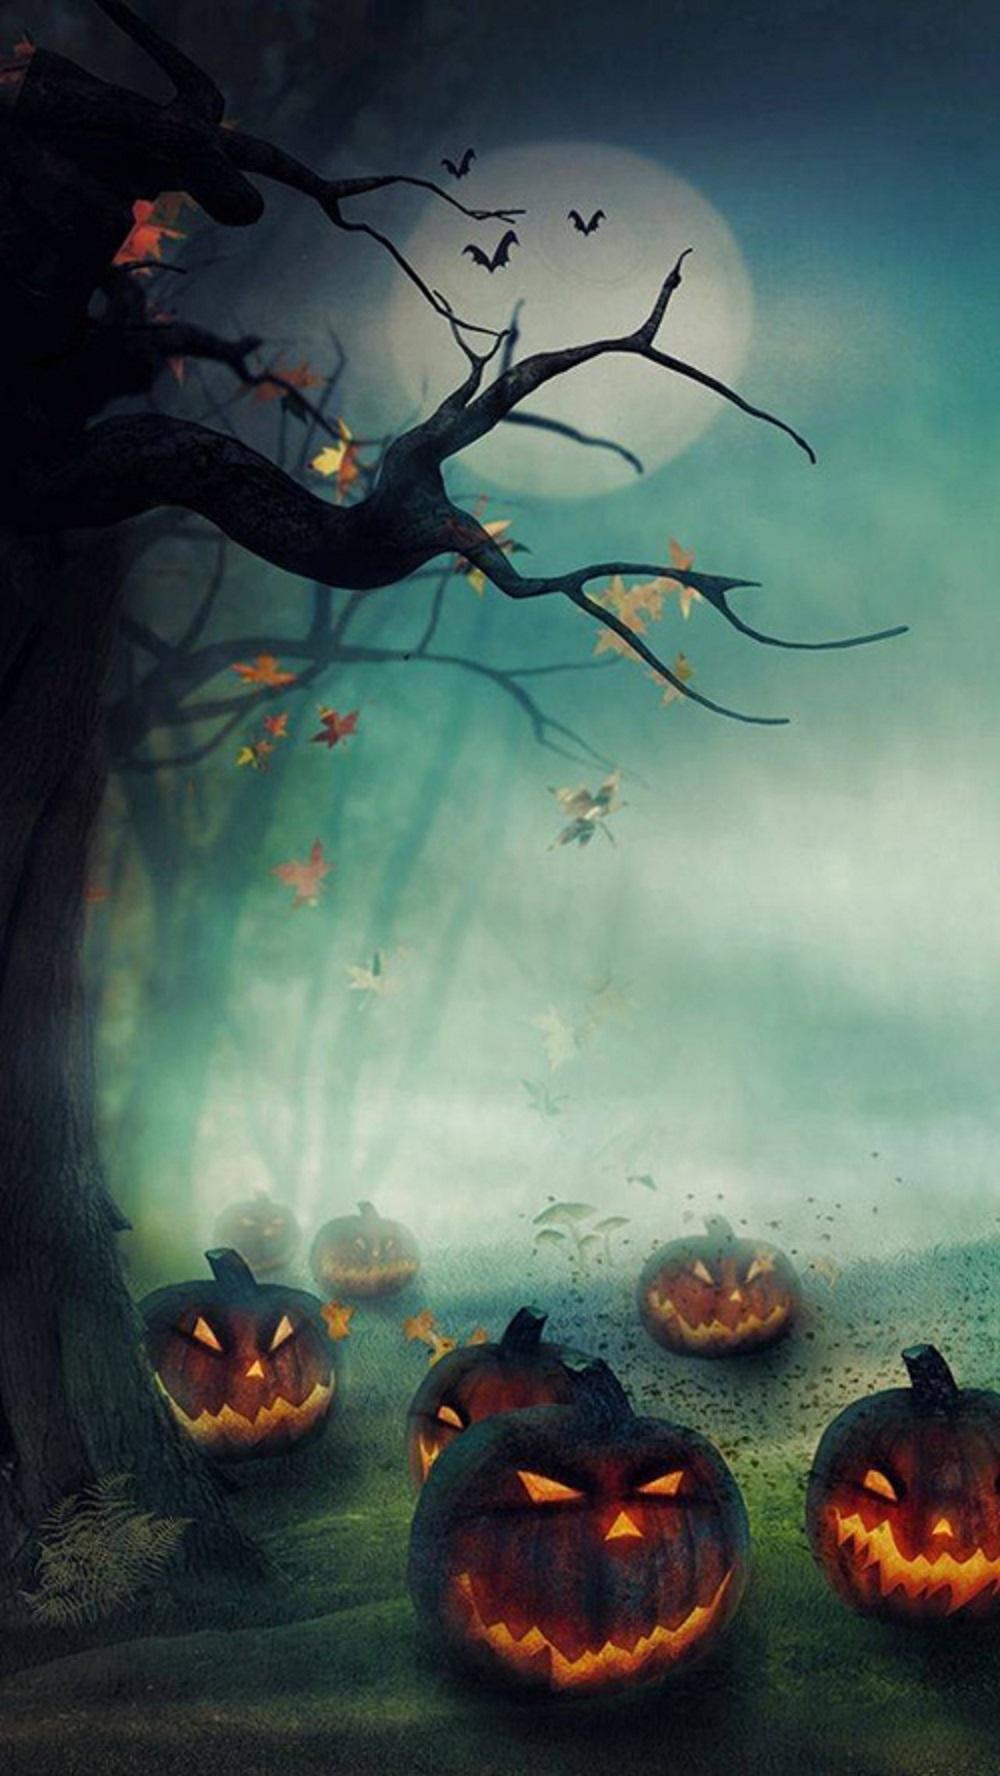 Iphone Halloween Wallpapers - KoLPaPer - Awesome Free HD Wallpapers